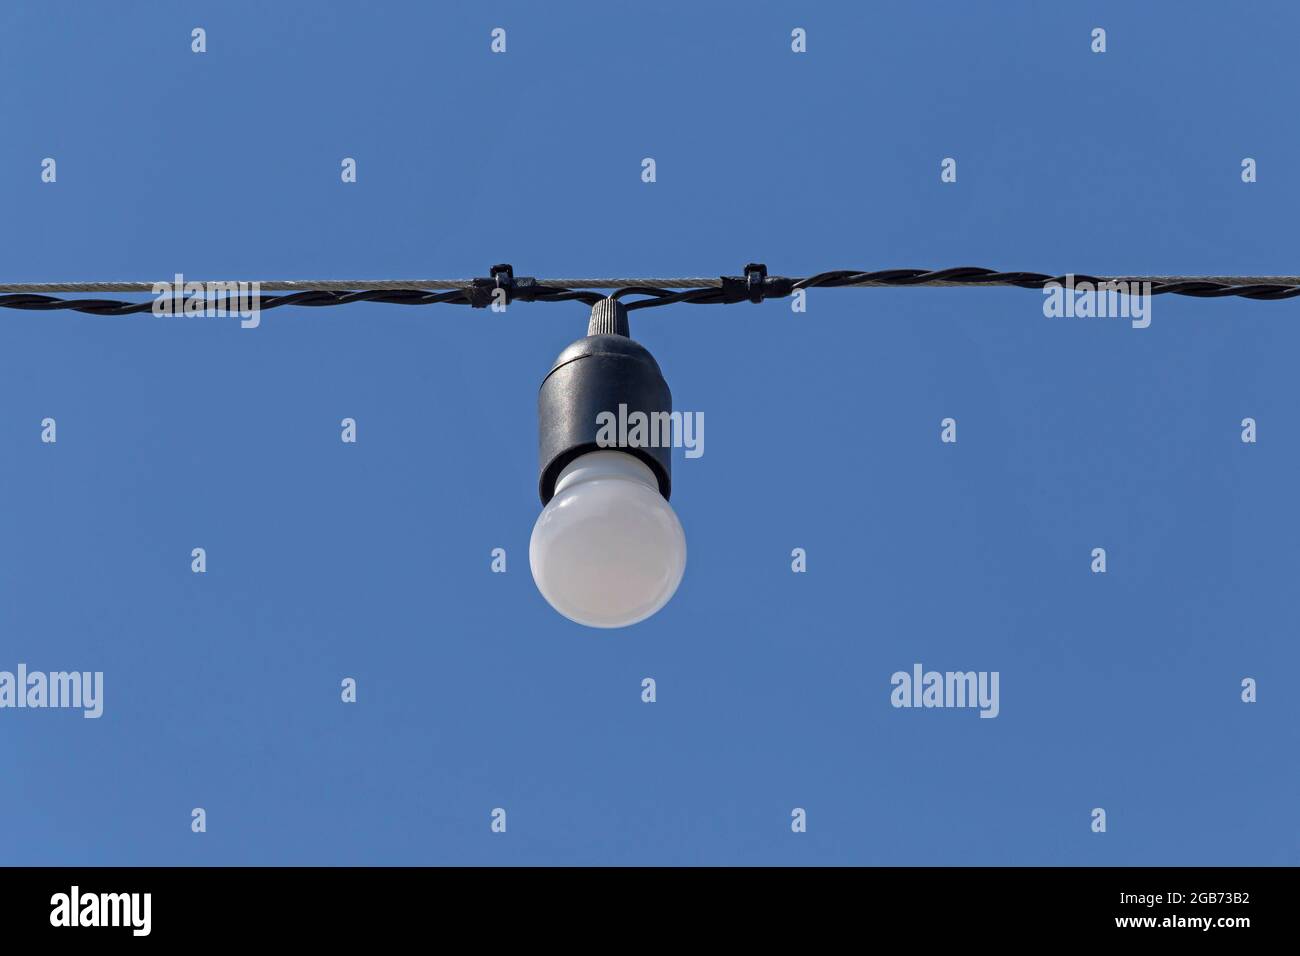 electrical bulb hanging on cable against blue sky Stock Photo